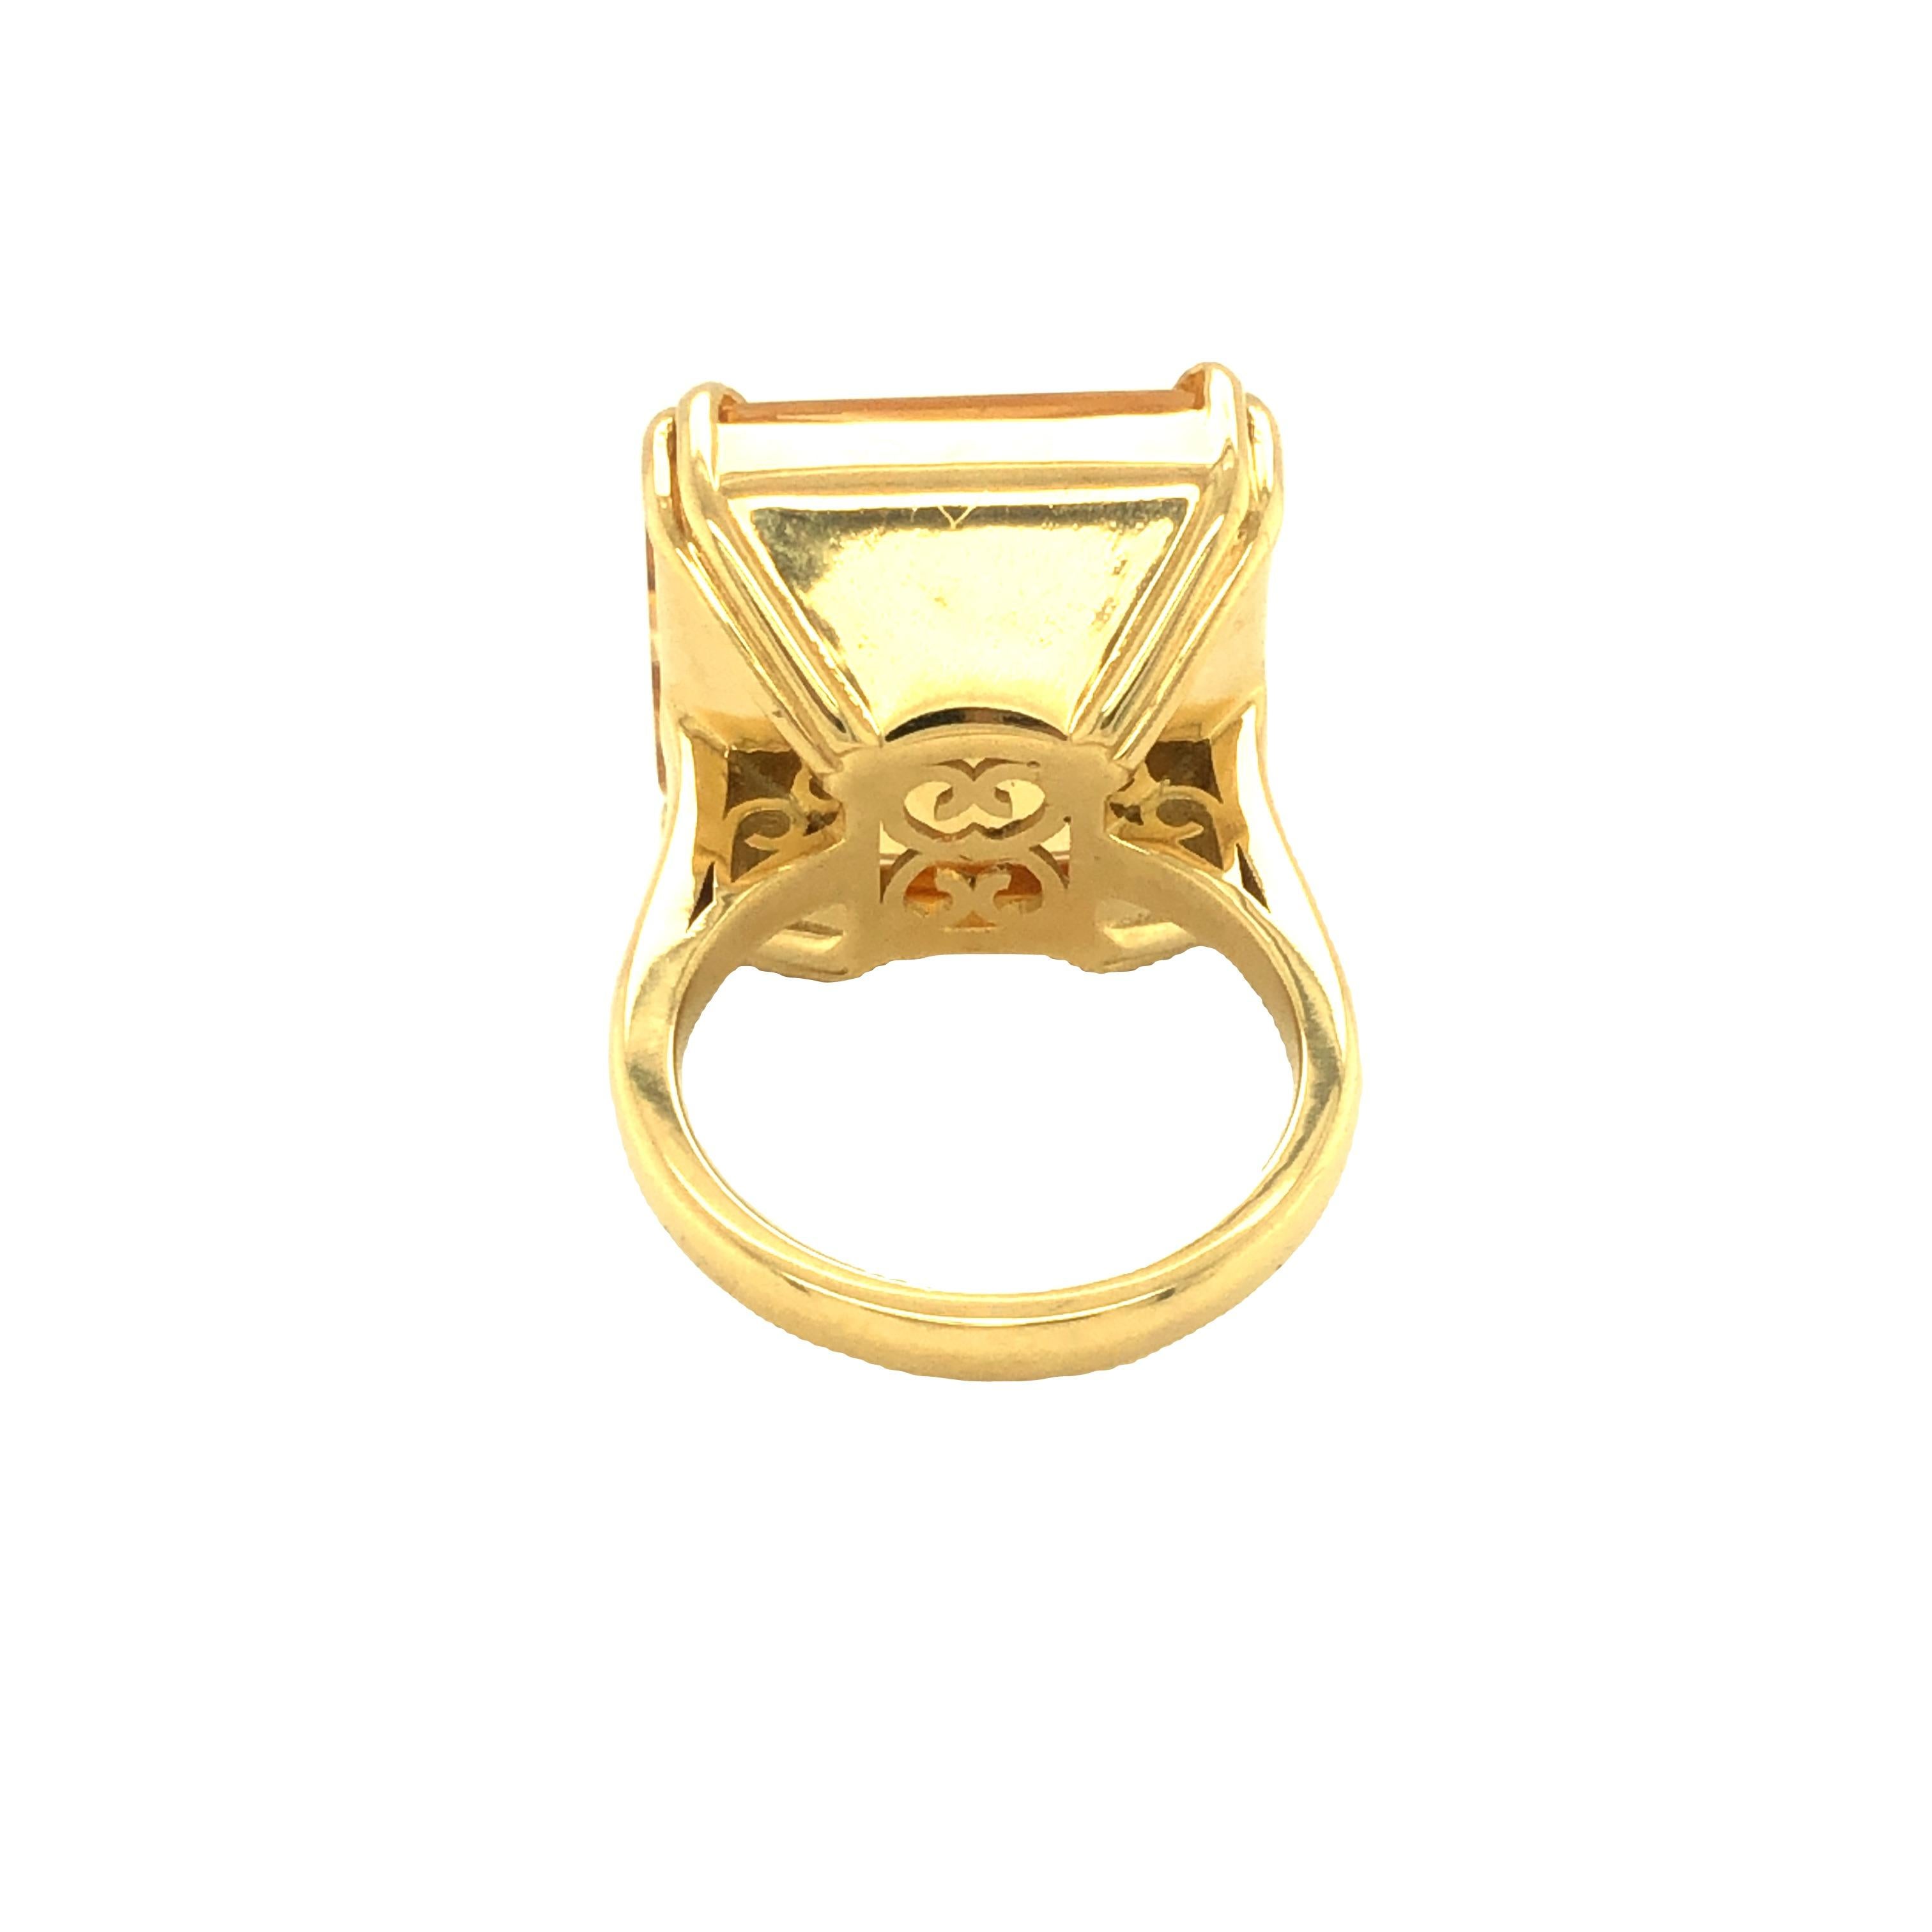 Retro Gems Are Forever 13 carat Citrine Solitaire Cocktail Ring 18K Yellow Gold For Sale